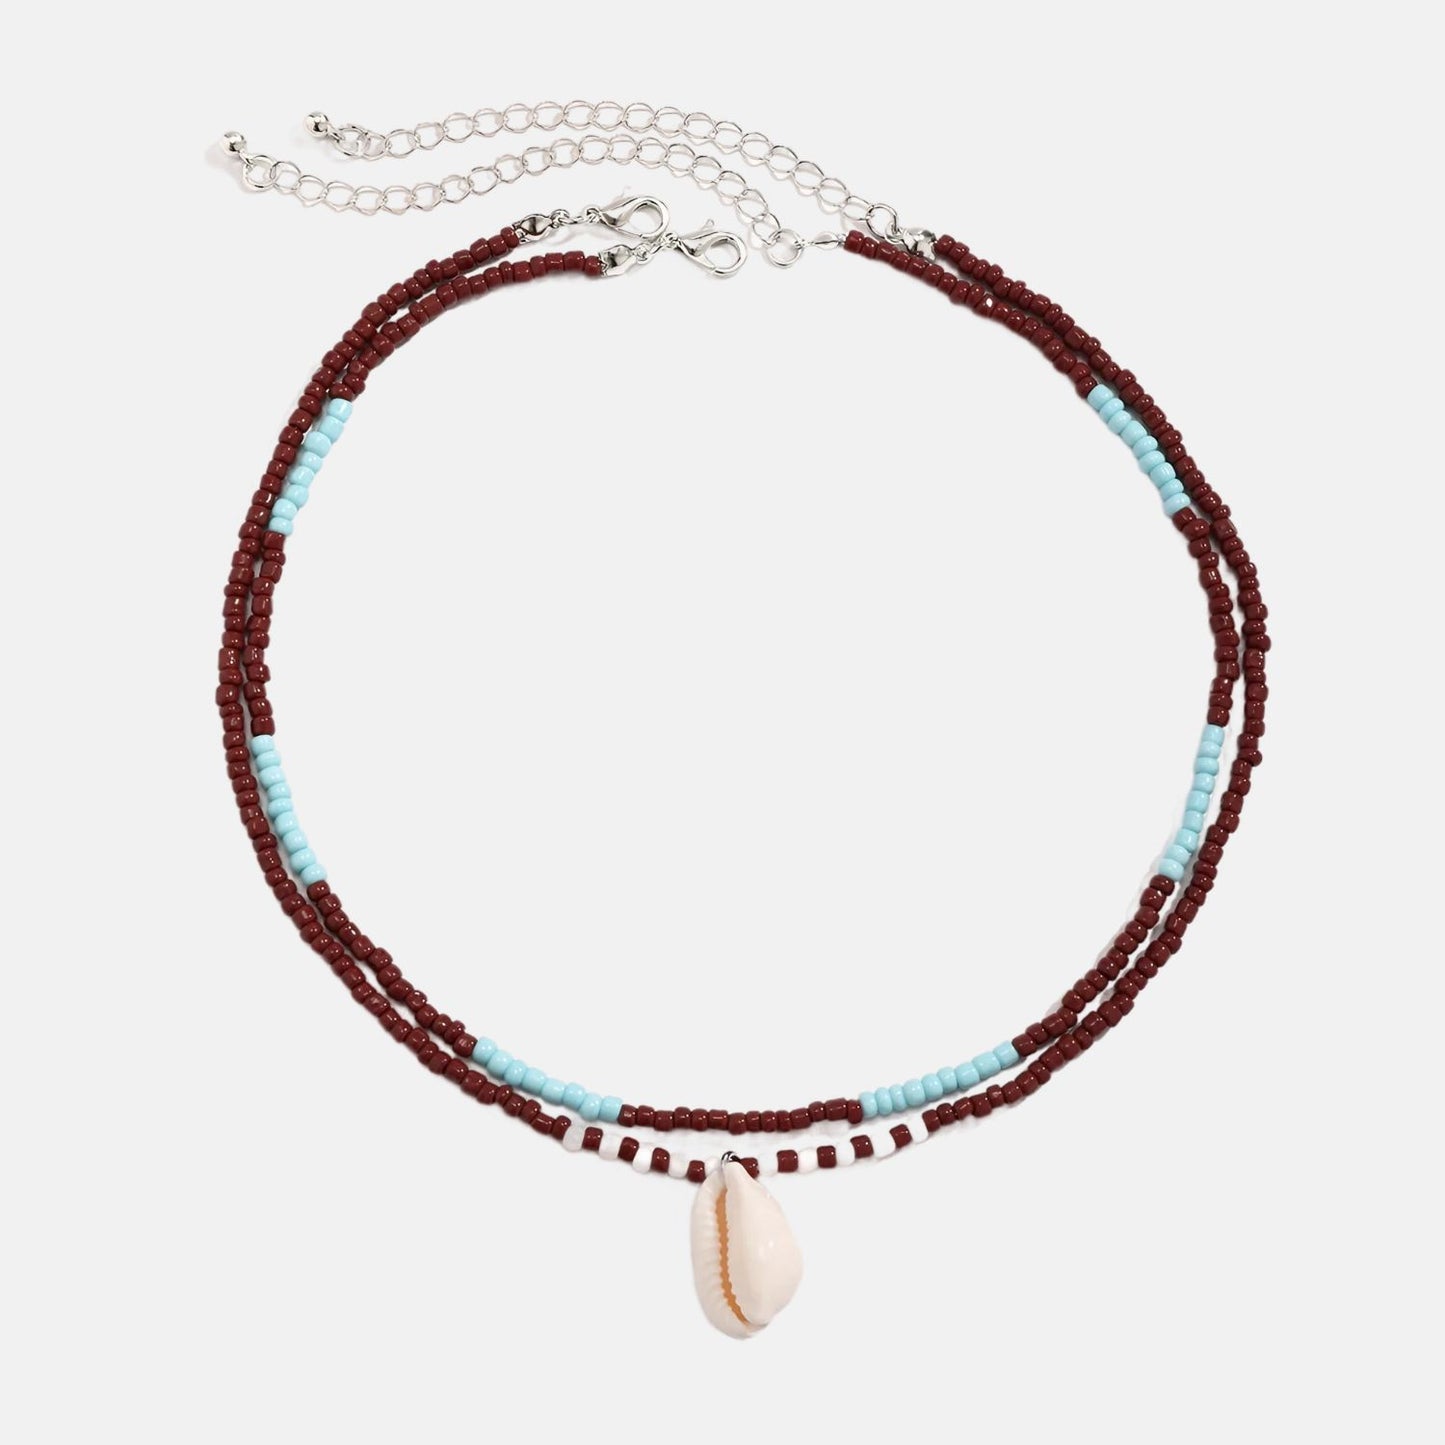 Duo of SEADUCTION shell necklaces